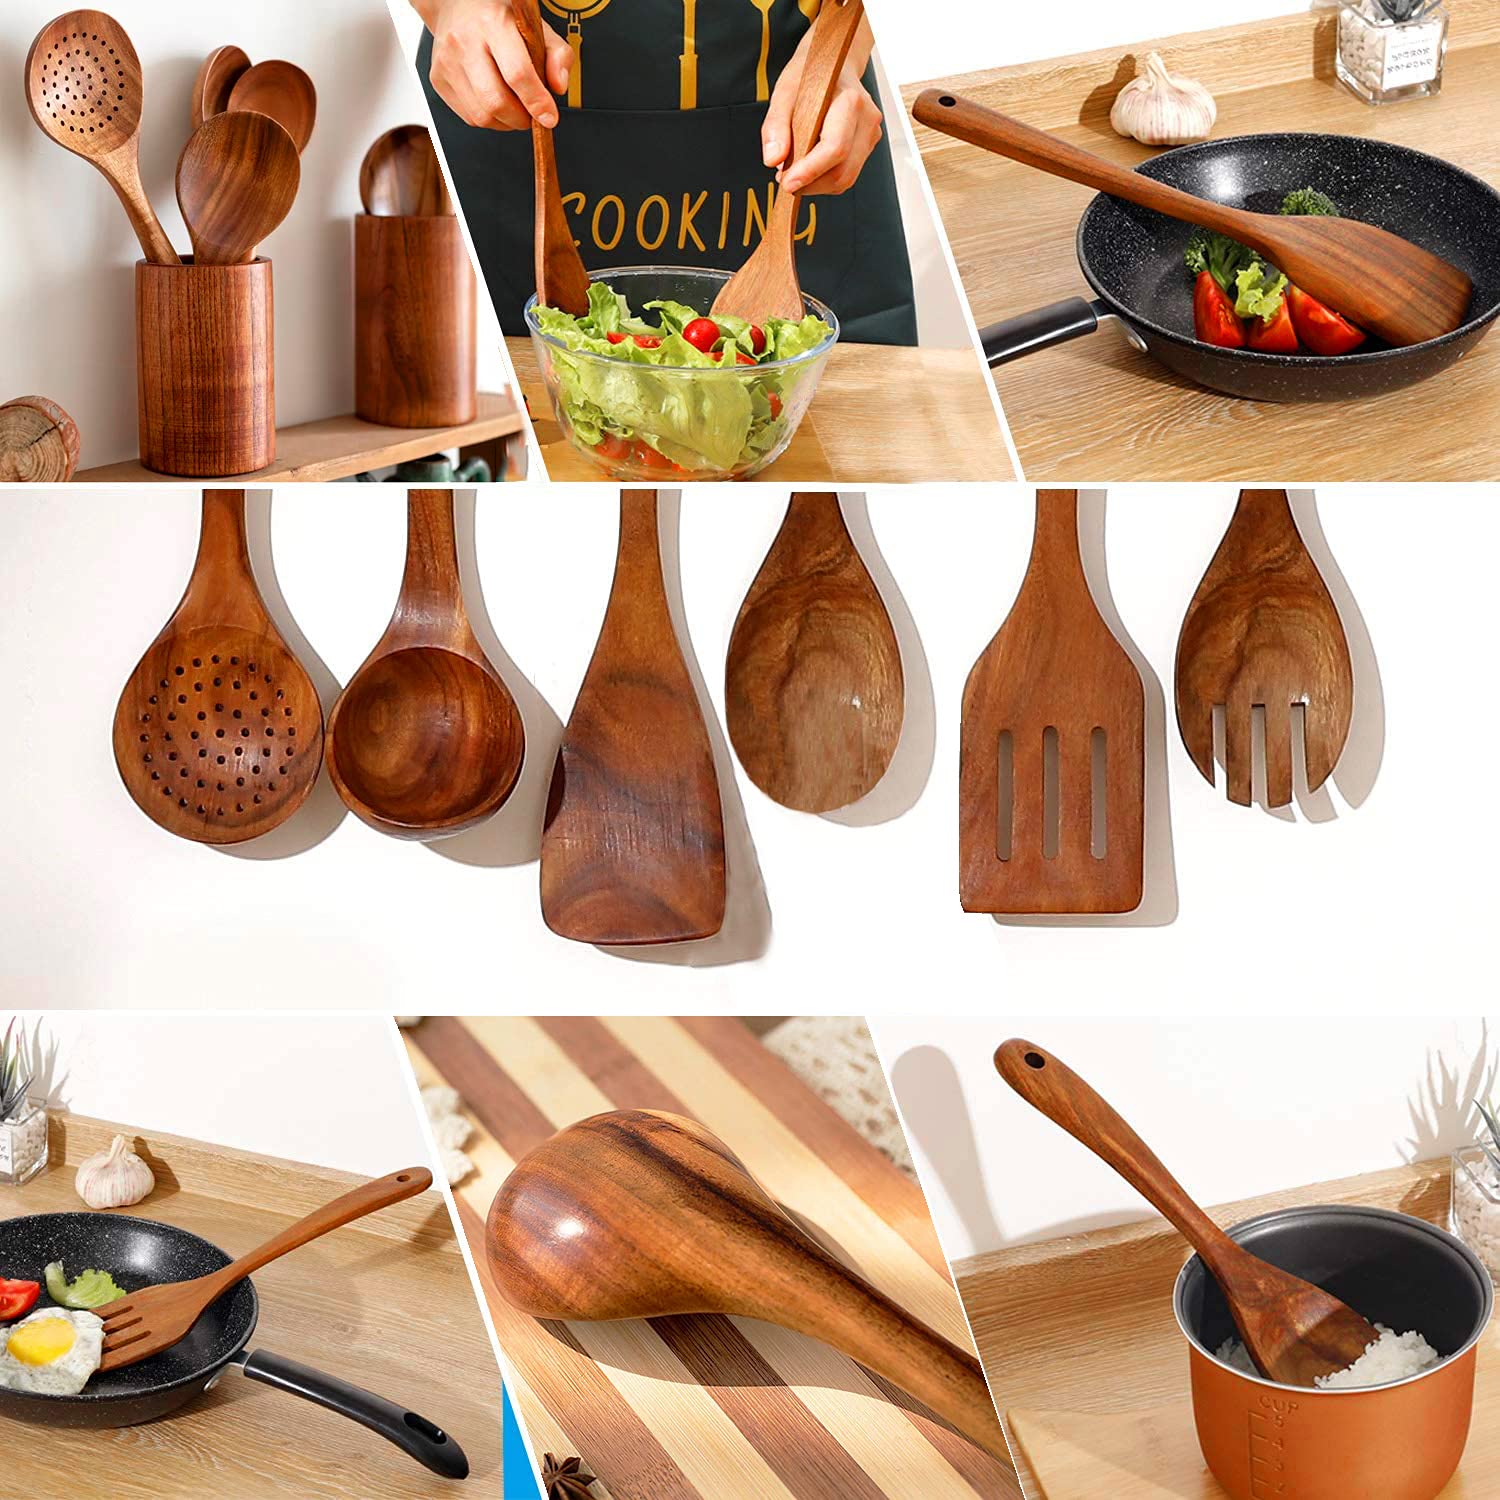 thinkstar Wooden Spoons For Cooking,7Pcs Wooden Utensils For Cooking Teak Wooden Kitchen Utensil Set Wooden Cooking Utensils Wooden S…